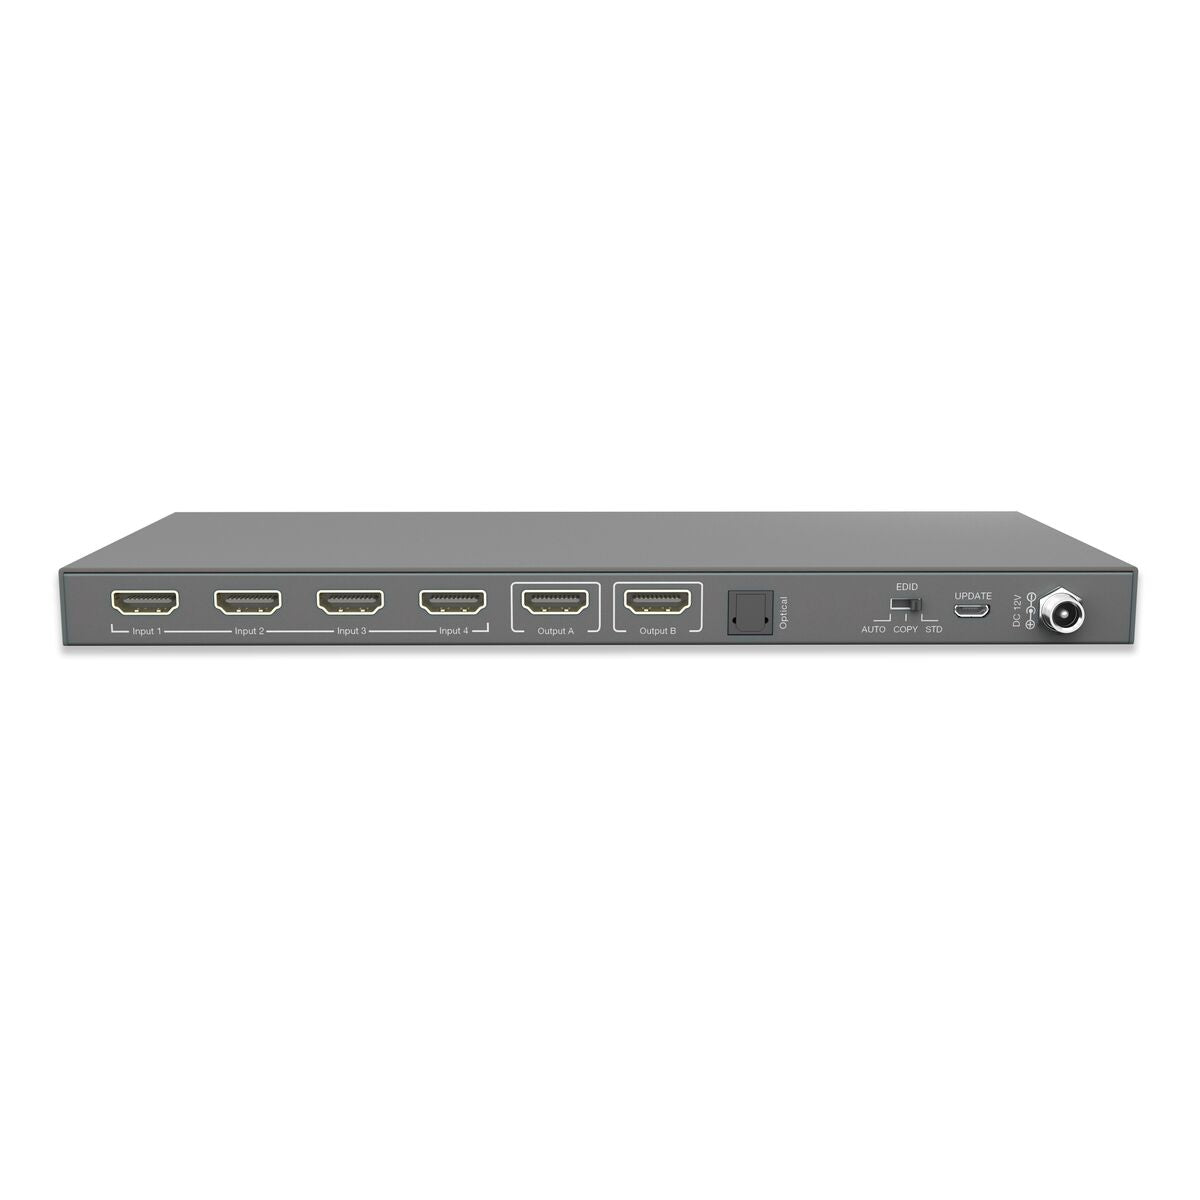 Connect 642 Pro - Matrix HDMI switch 4K 4 in / 2 uit - Product Image HDMI switch | Marmitek